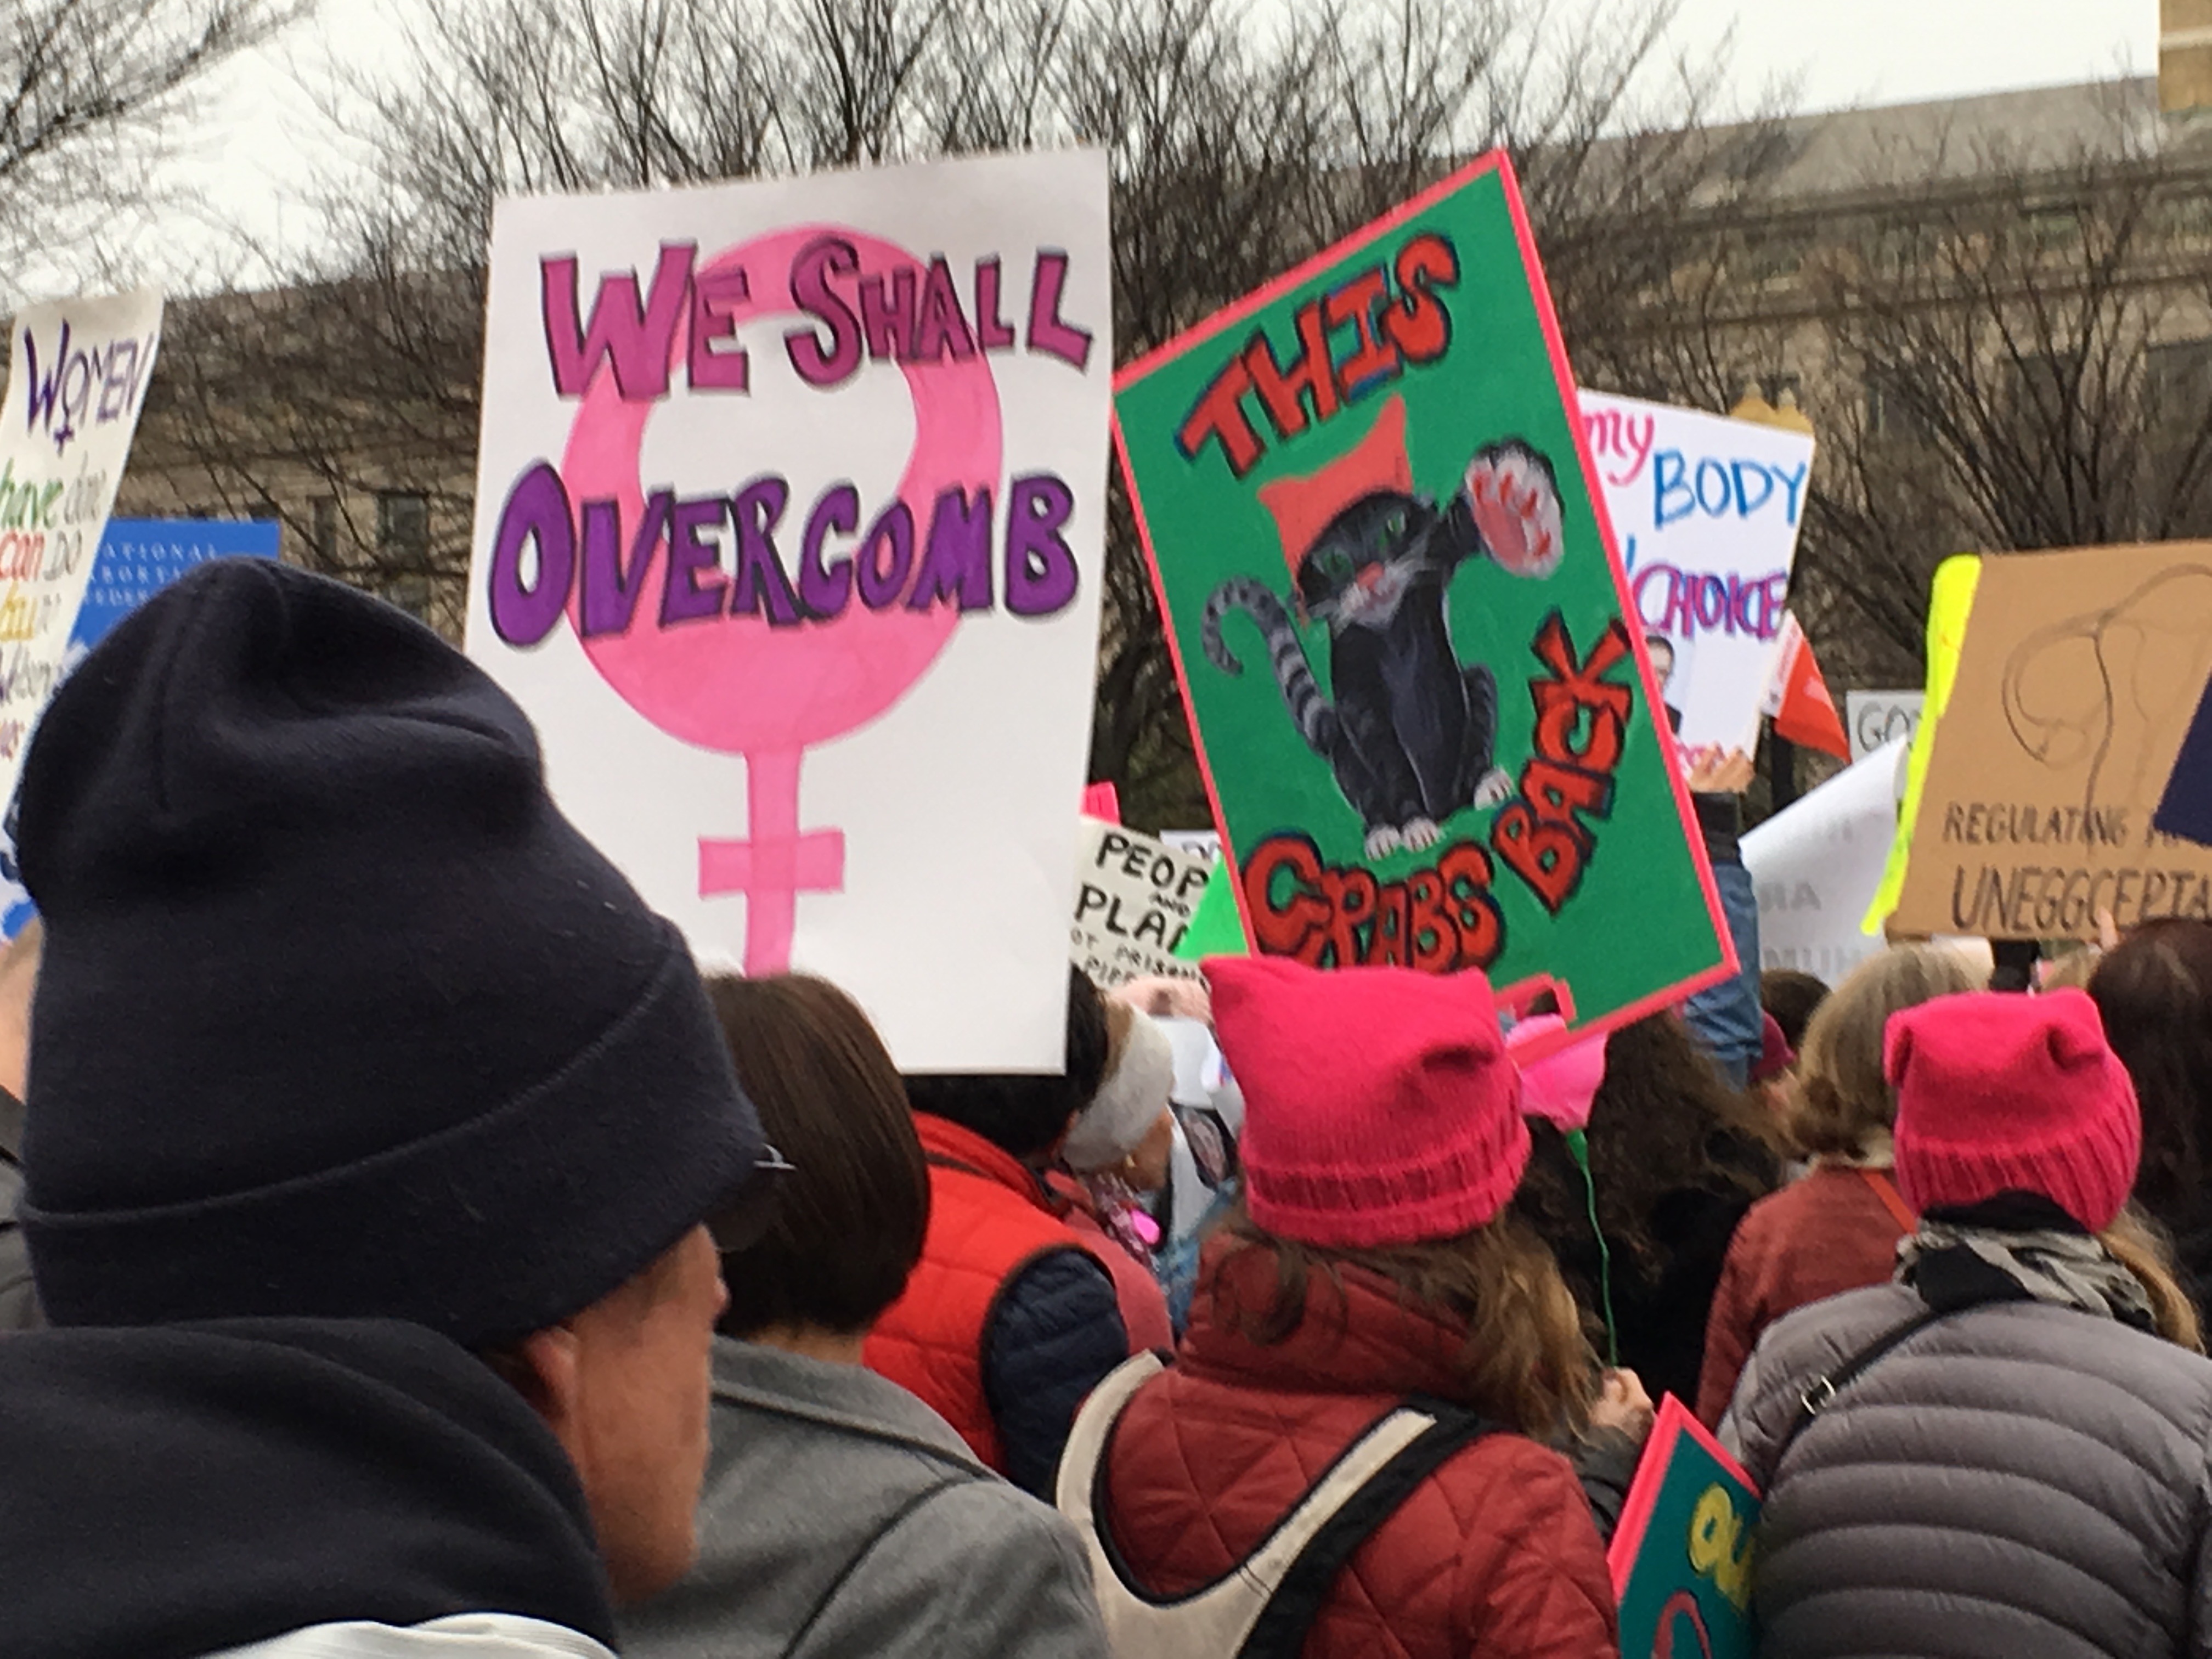 A sign with a feminine symbol that reads "We shall overcomb"